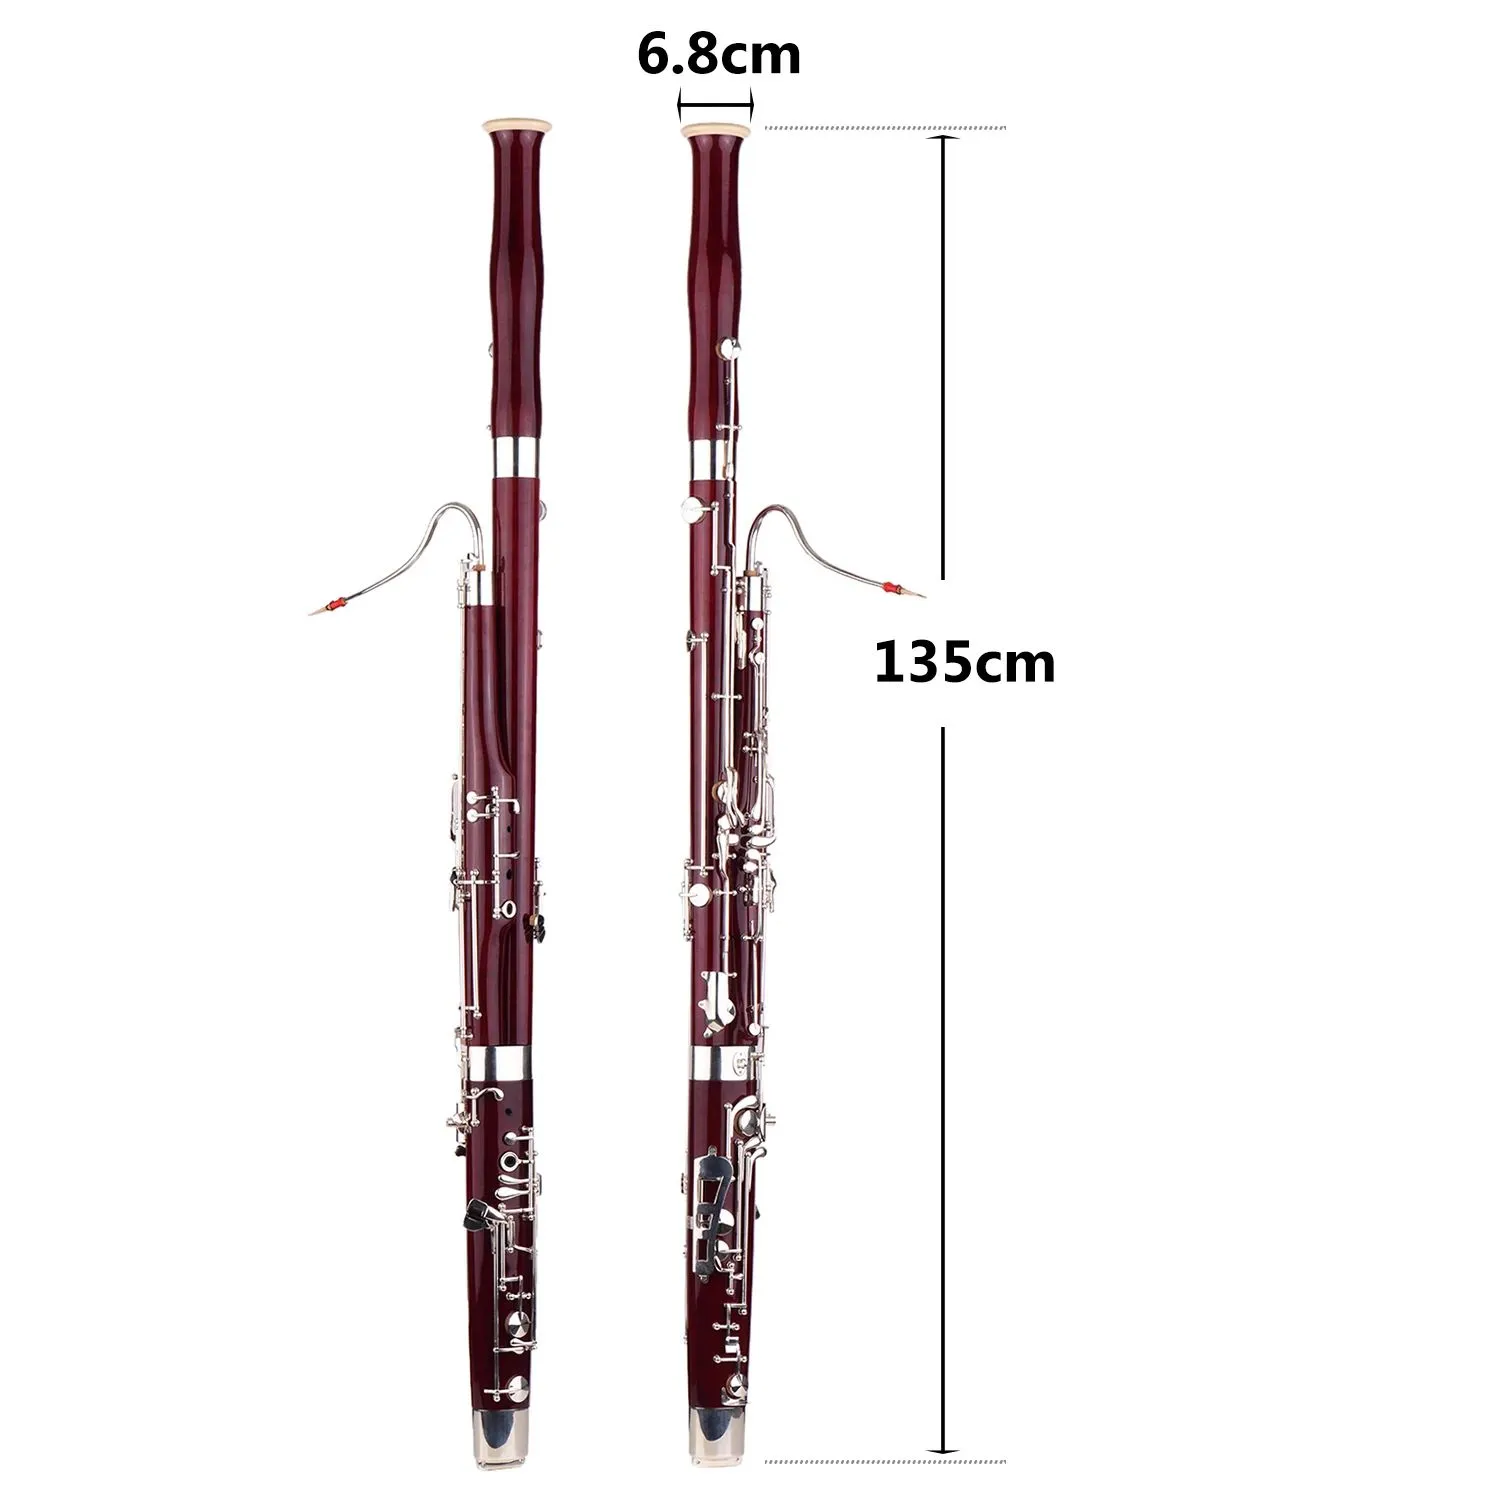 Professional Woodwind Instrument Maple Wood Body Cupronickel Silver Plated Keys C Key Bassoon with Reed Carrying Case